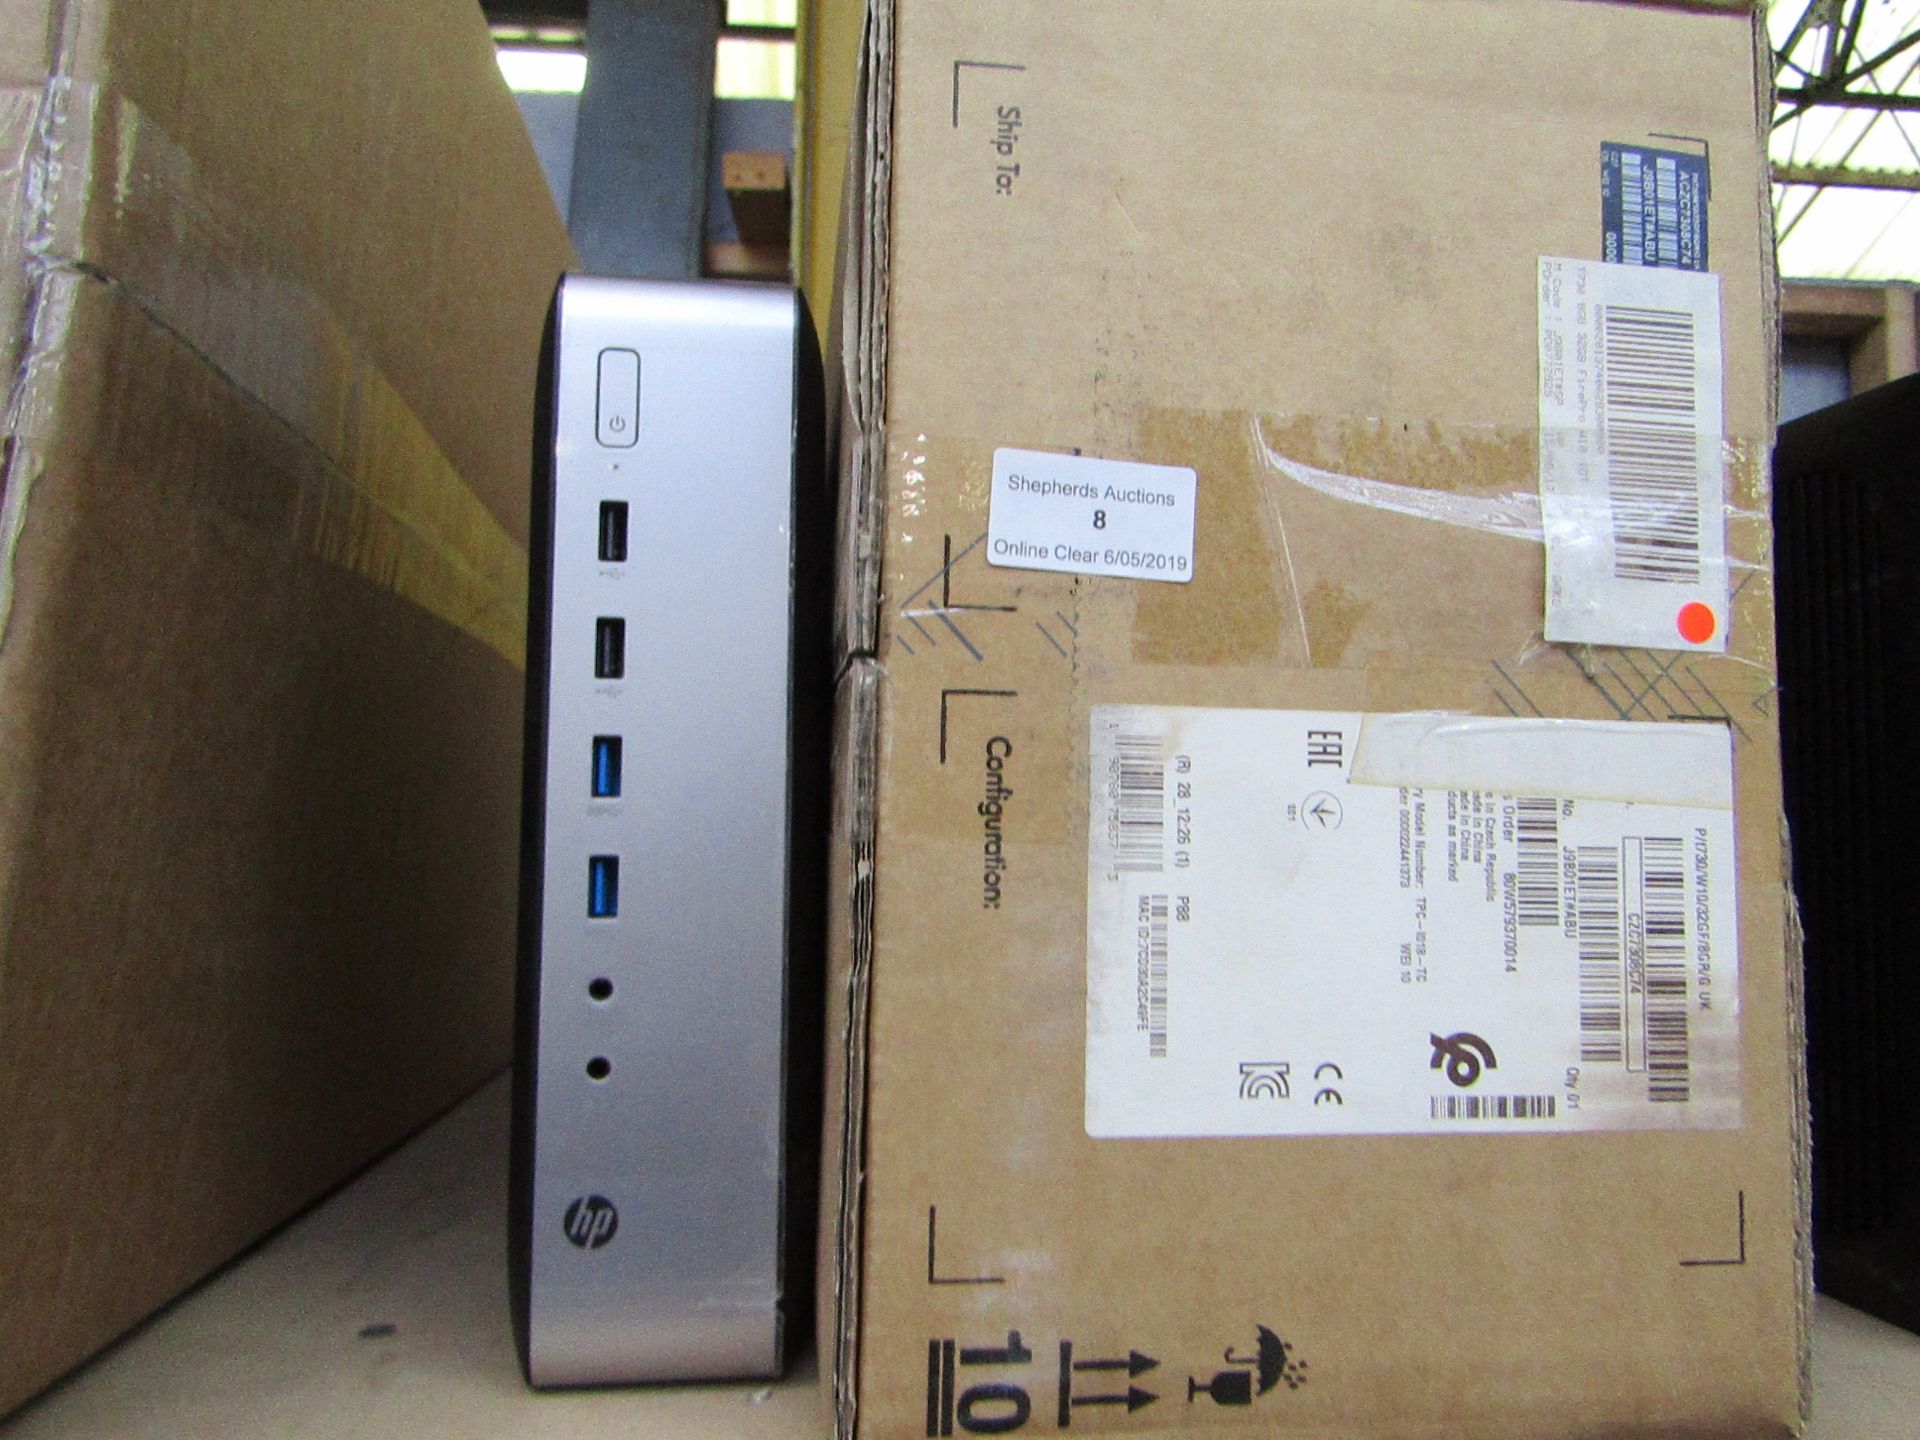 HP T730 TP 16GF/4GR ES TC, Grade B (refer to Lot 0 for condition) and boxed.Processor: 1 x AMD